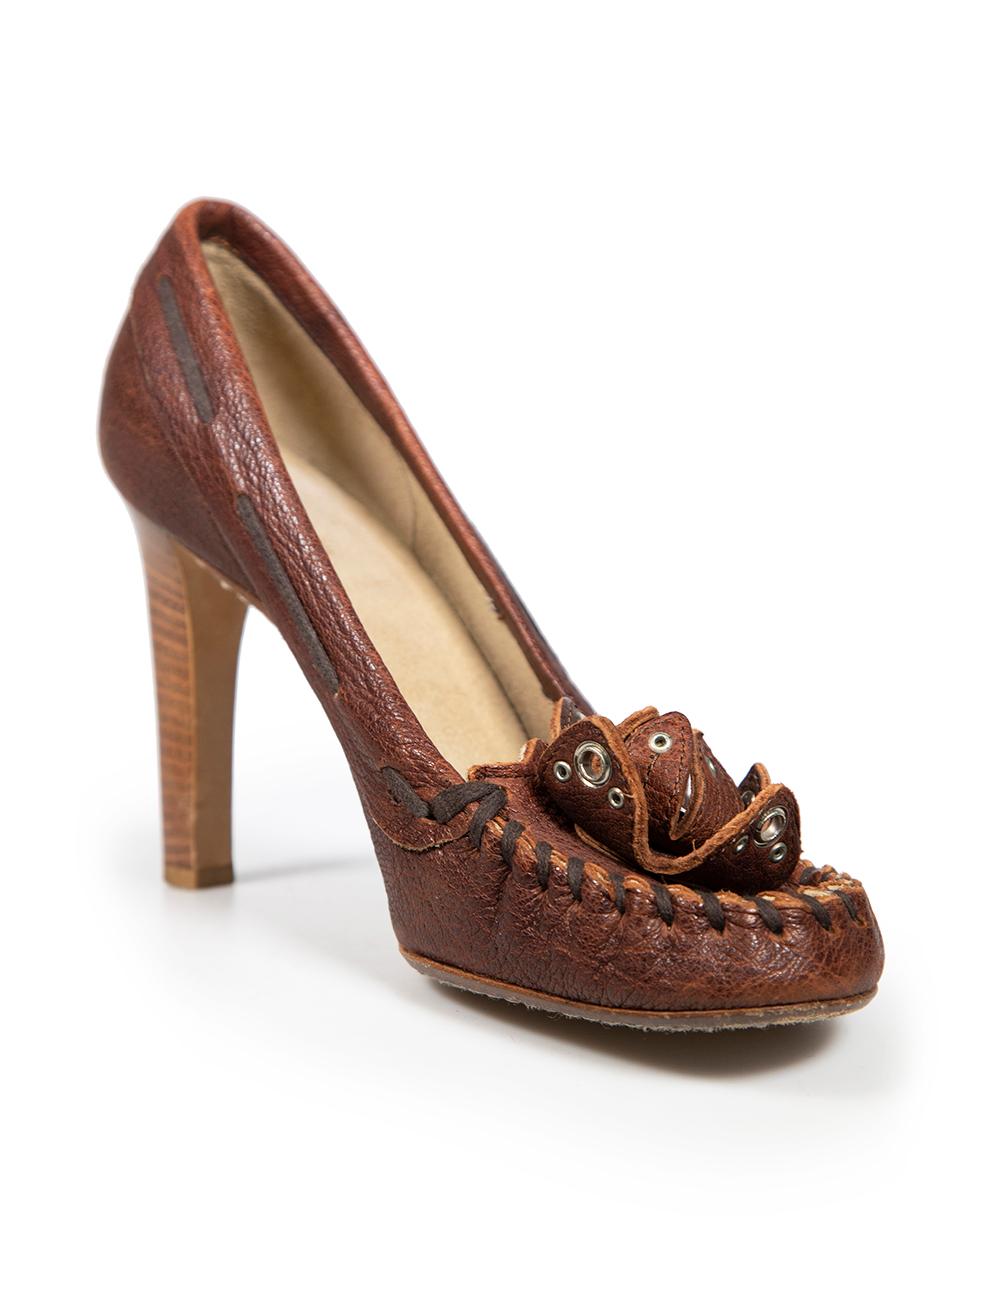 CONDITION is Good. General wear to shoes is evident. Moderate signs of wear to both shoe heels with abrasions to the leather and the flowers have started to curl on this used Miu Miu designer resale item.
 
 Details
 Brown
 Leather
 Pumps
 Round